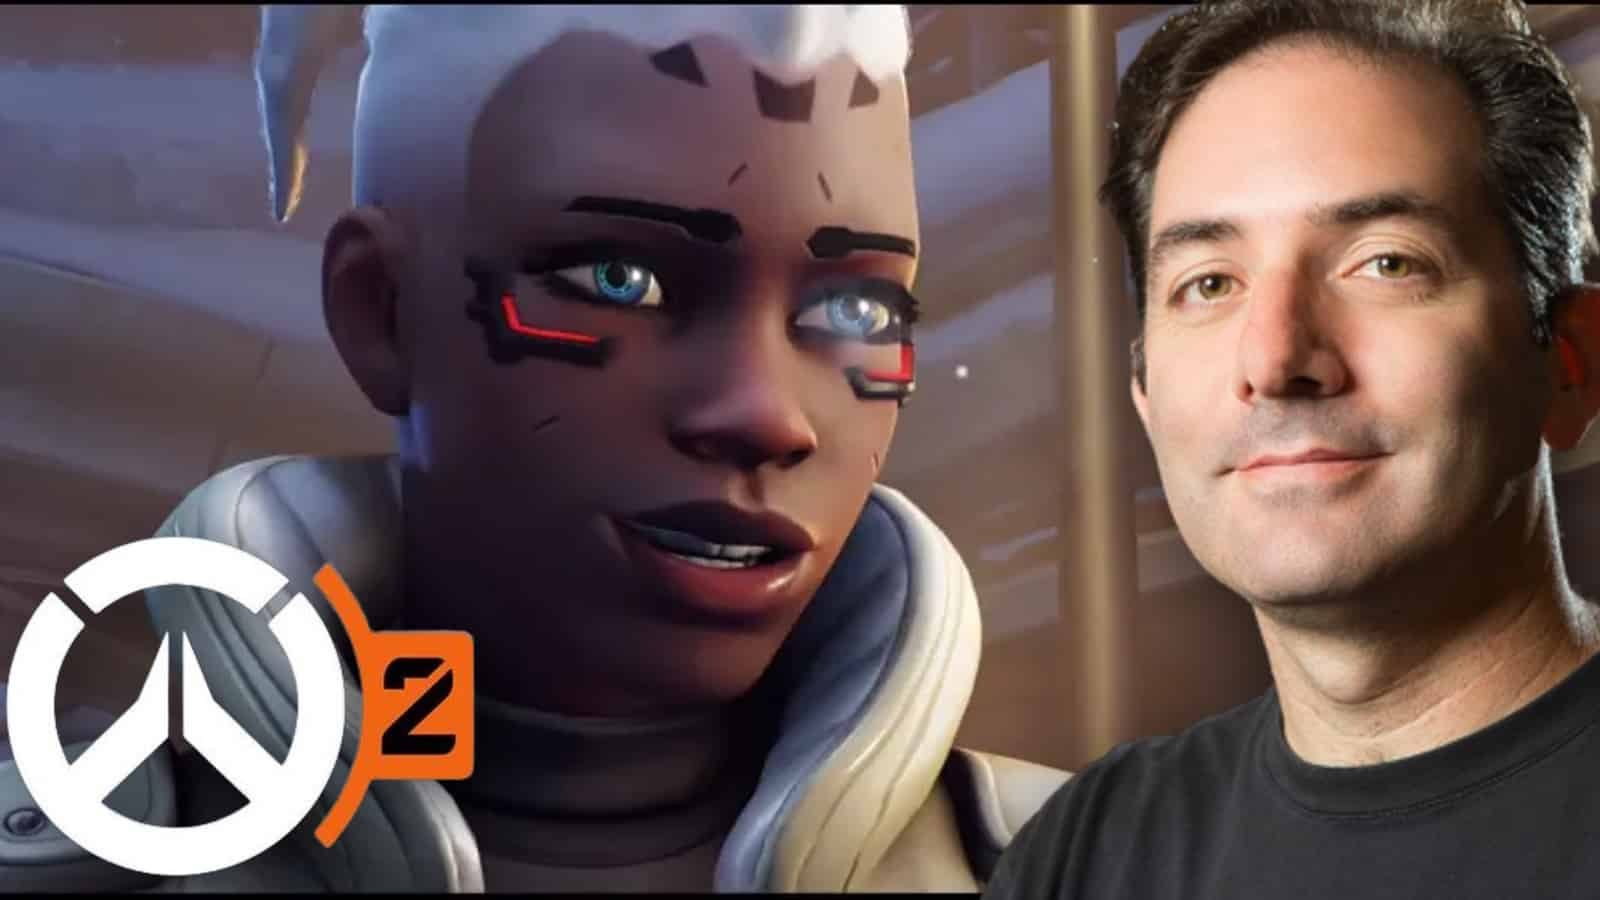 Jeff KAplan and the hero Sojourn from OW2